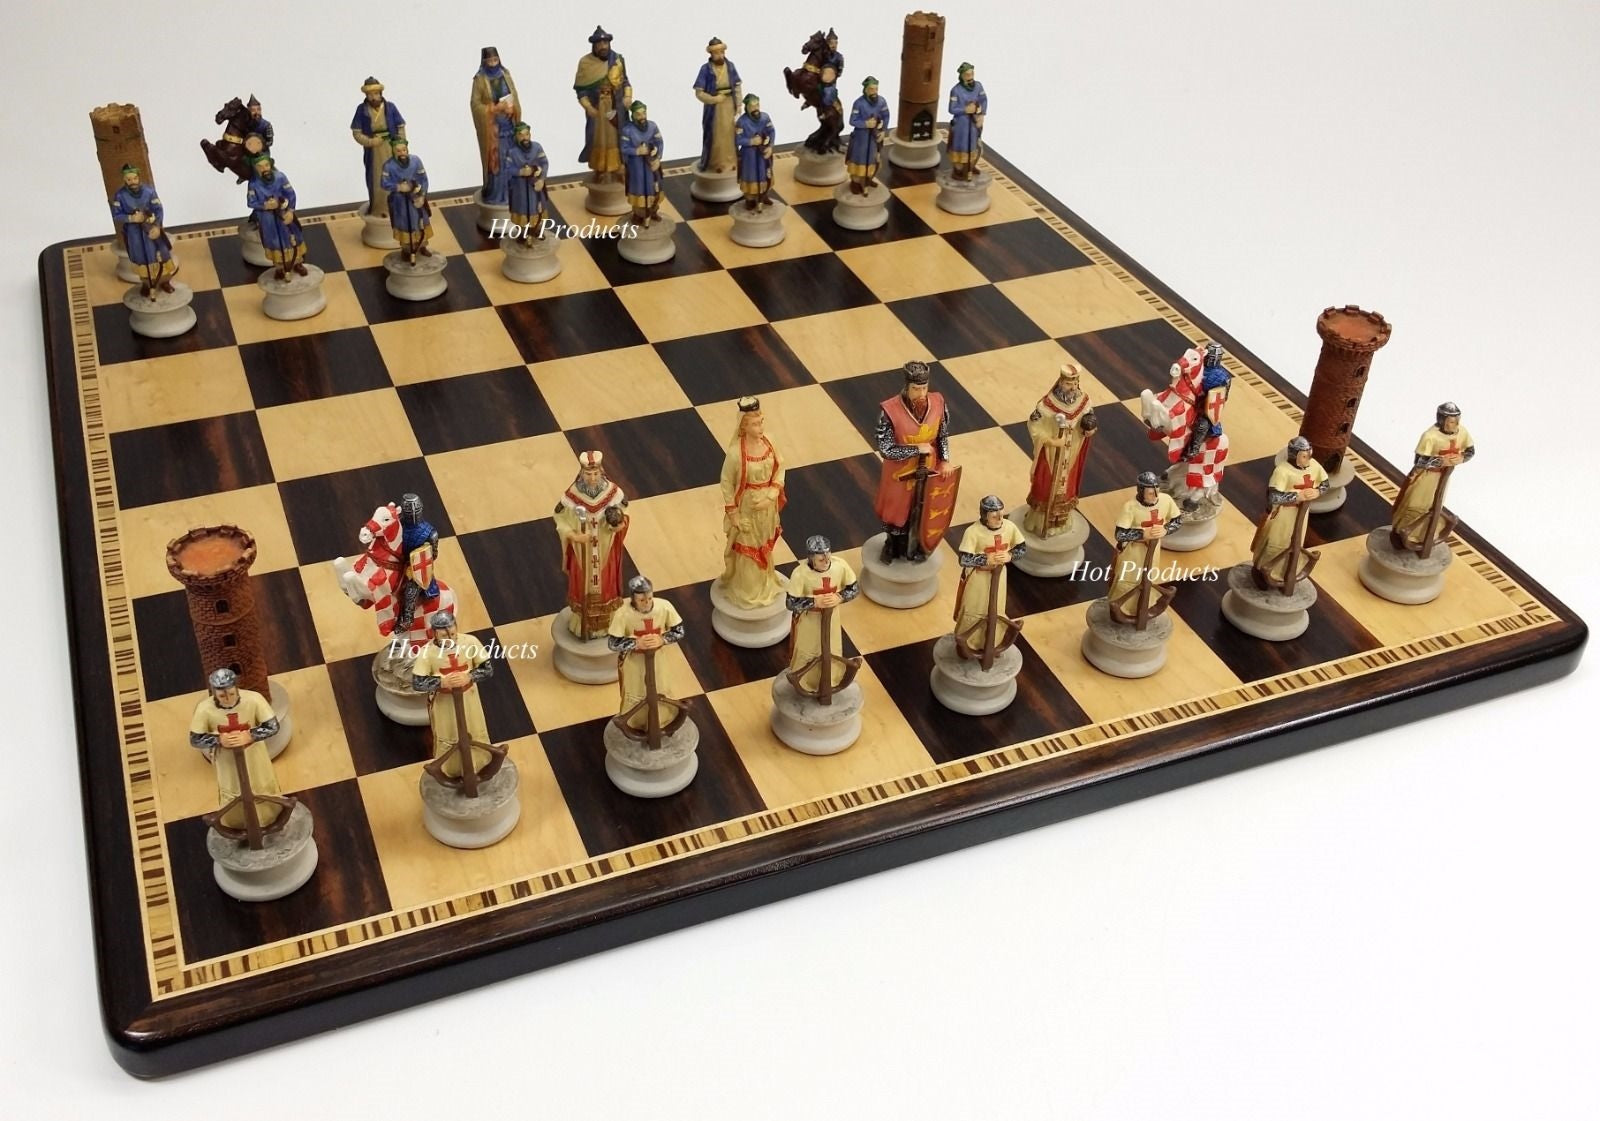 Chess Pieces Wooden Religious Chess Pieces 